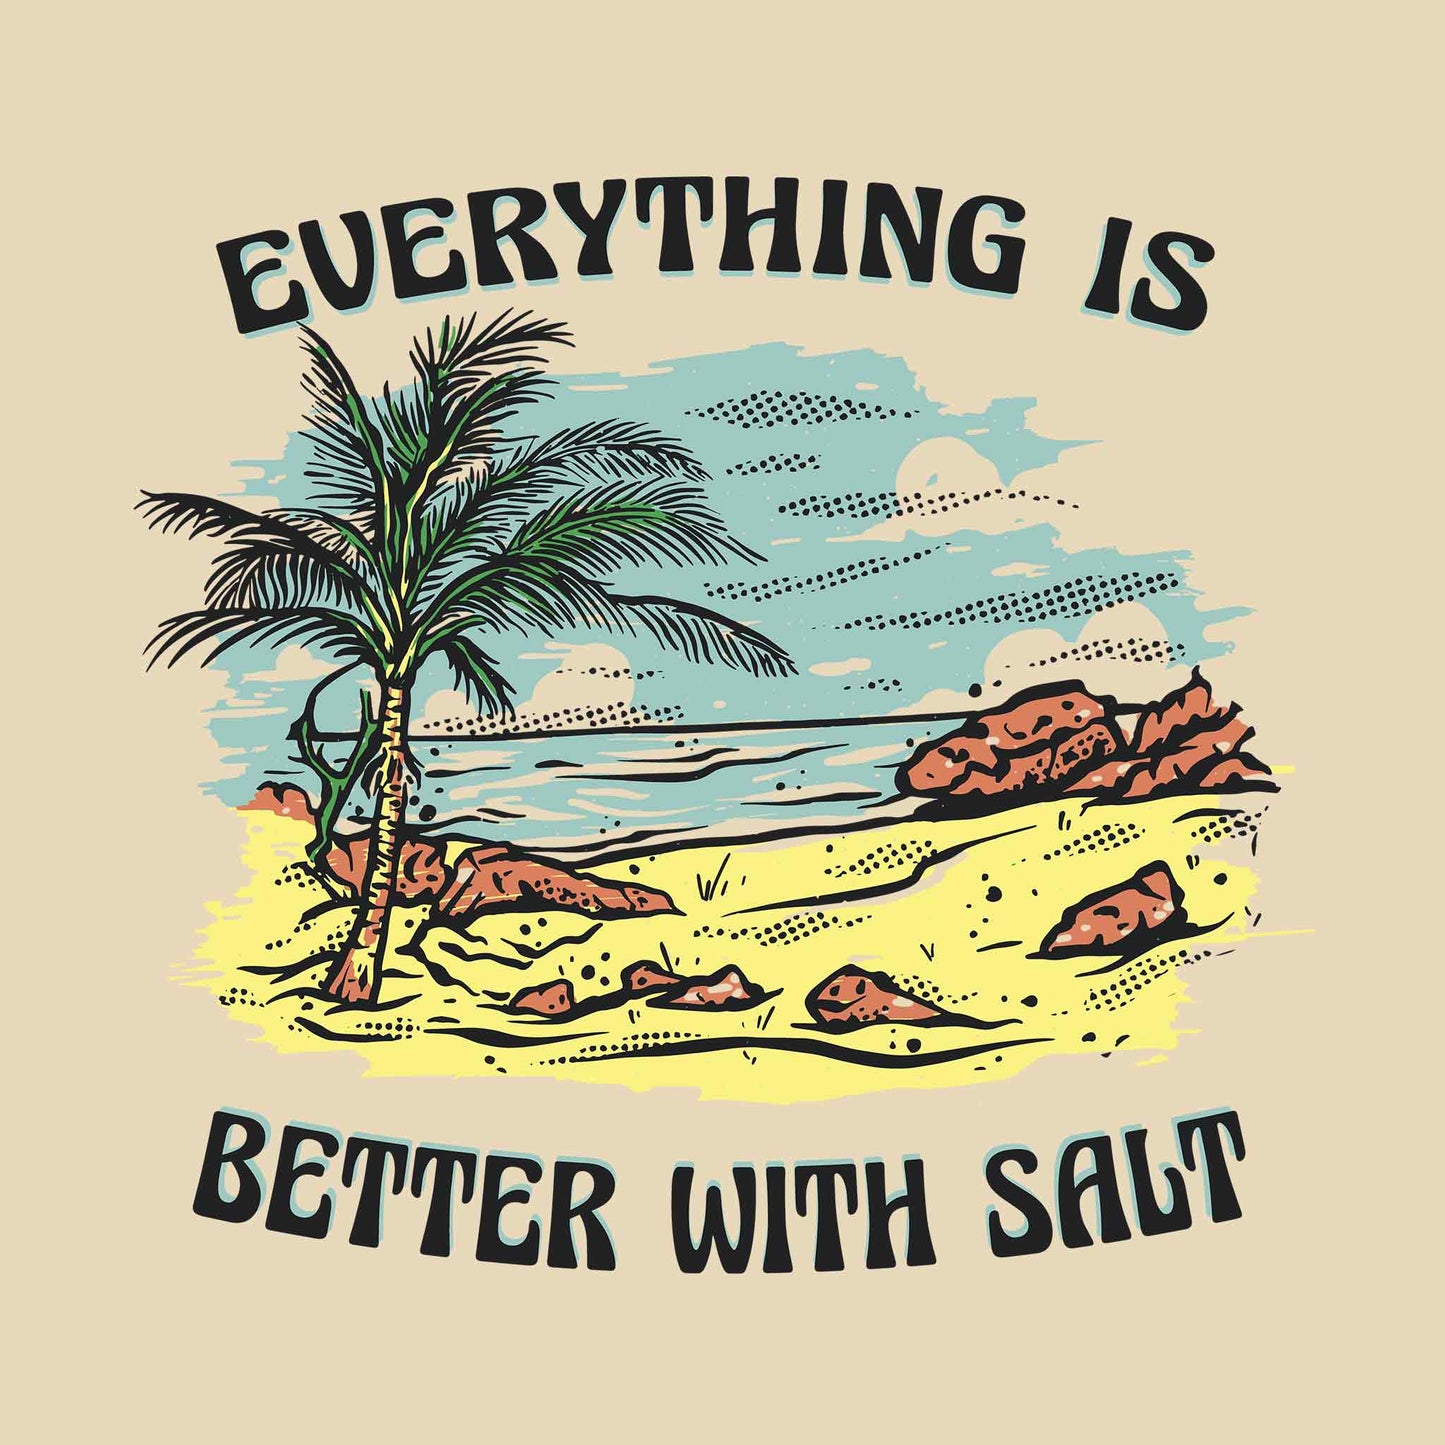 Everything is Better With Salt T-Shirt